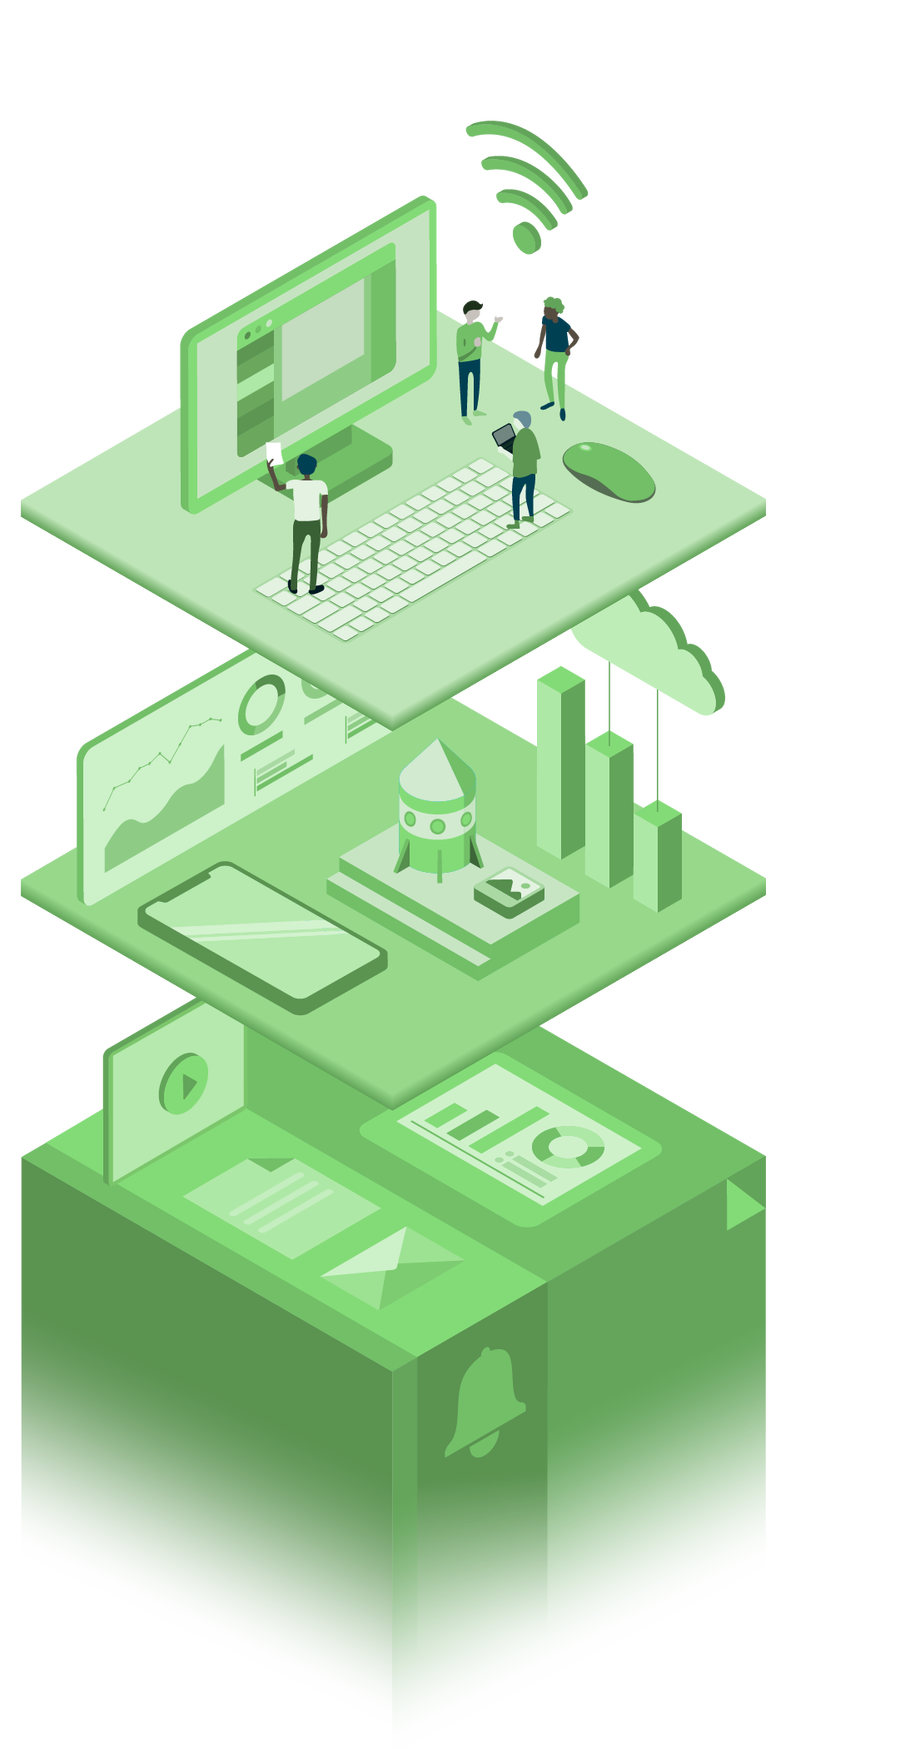 state of saas proposals isometric